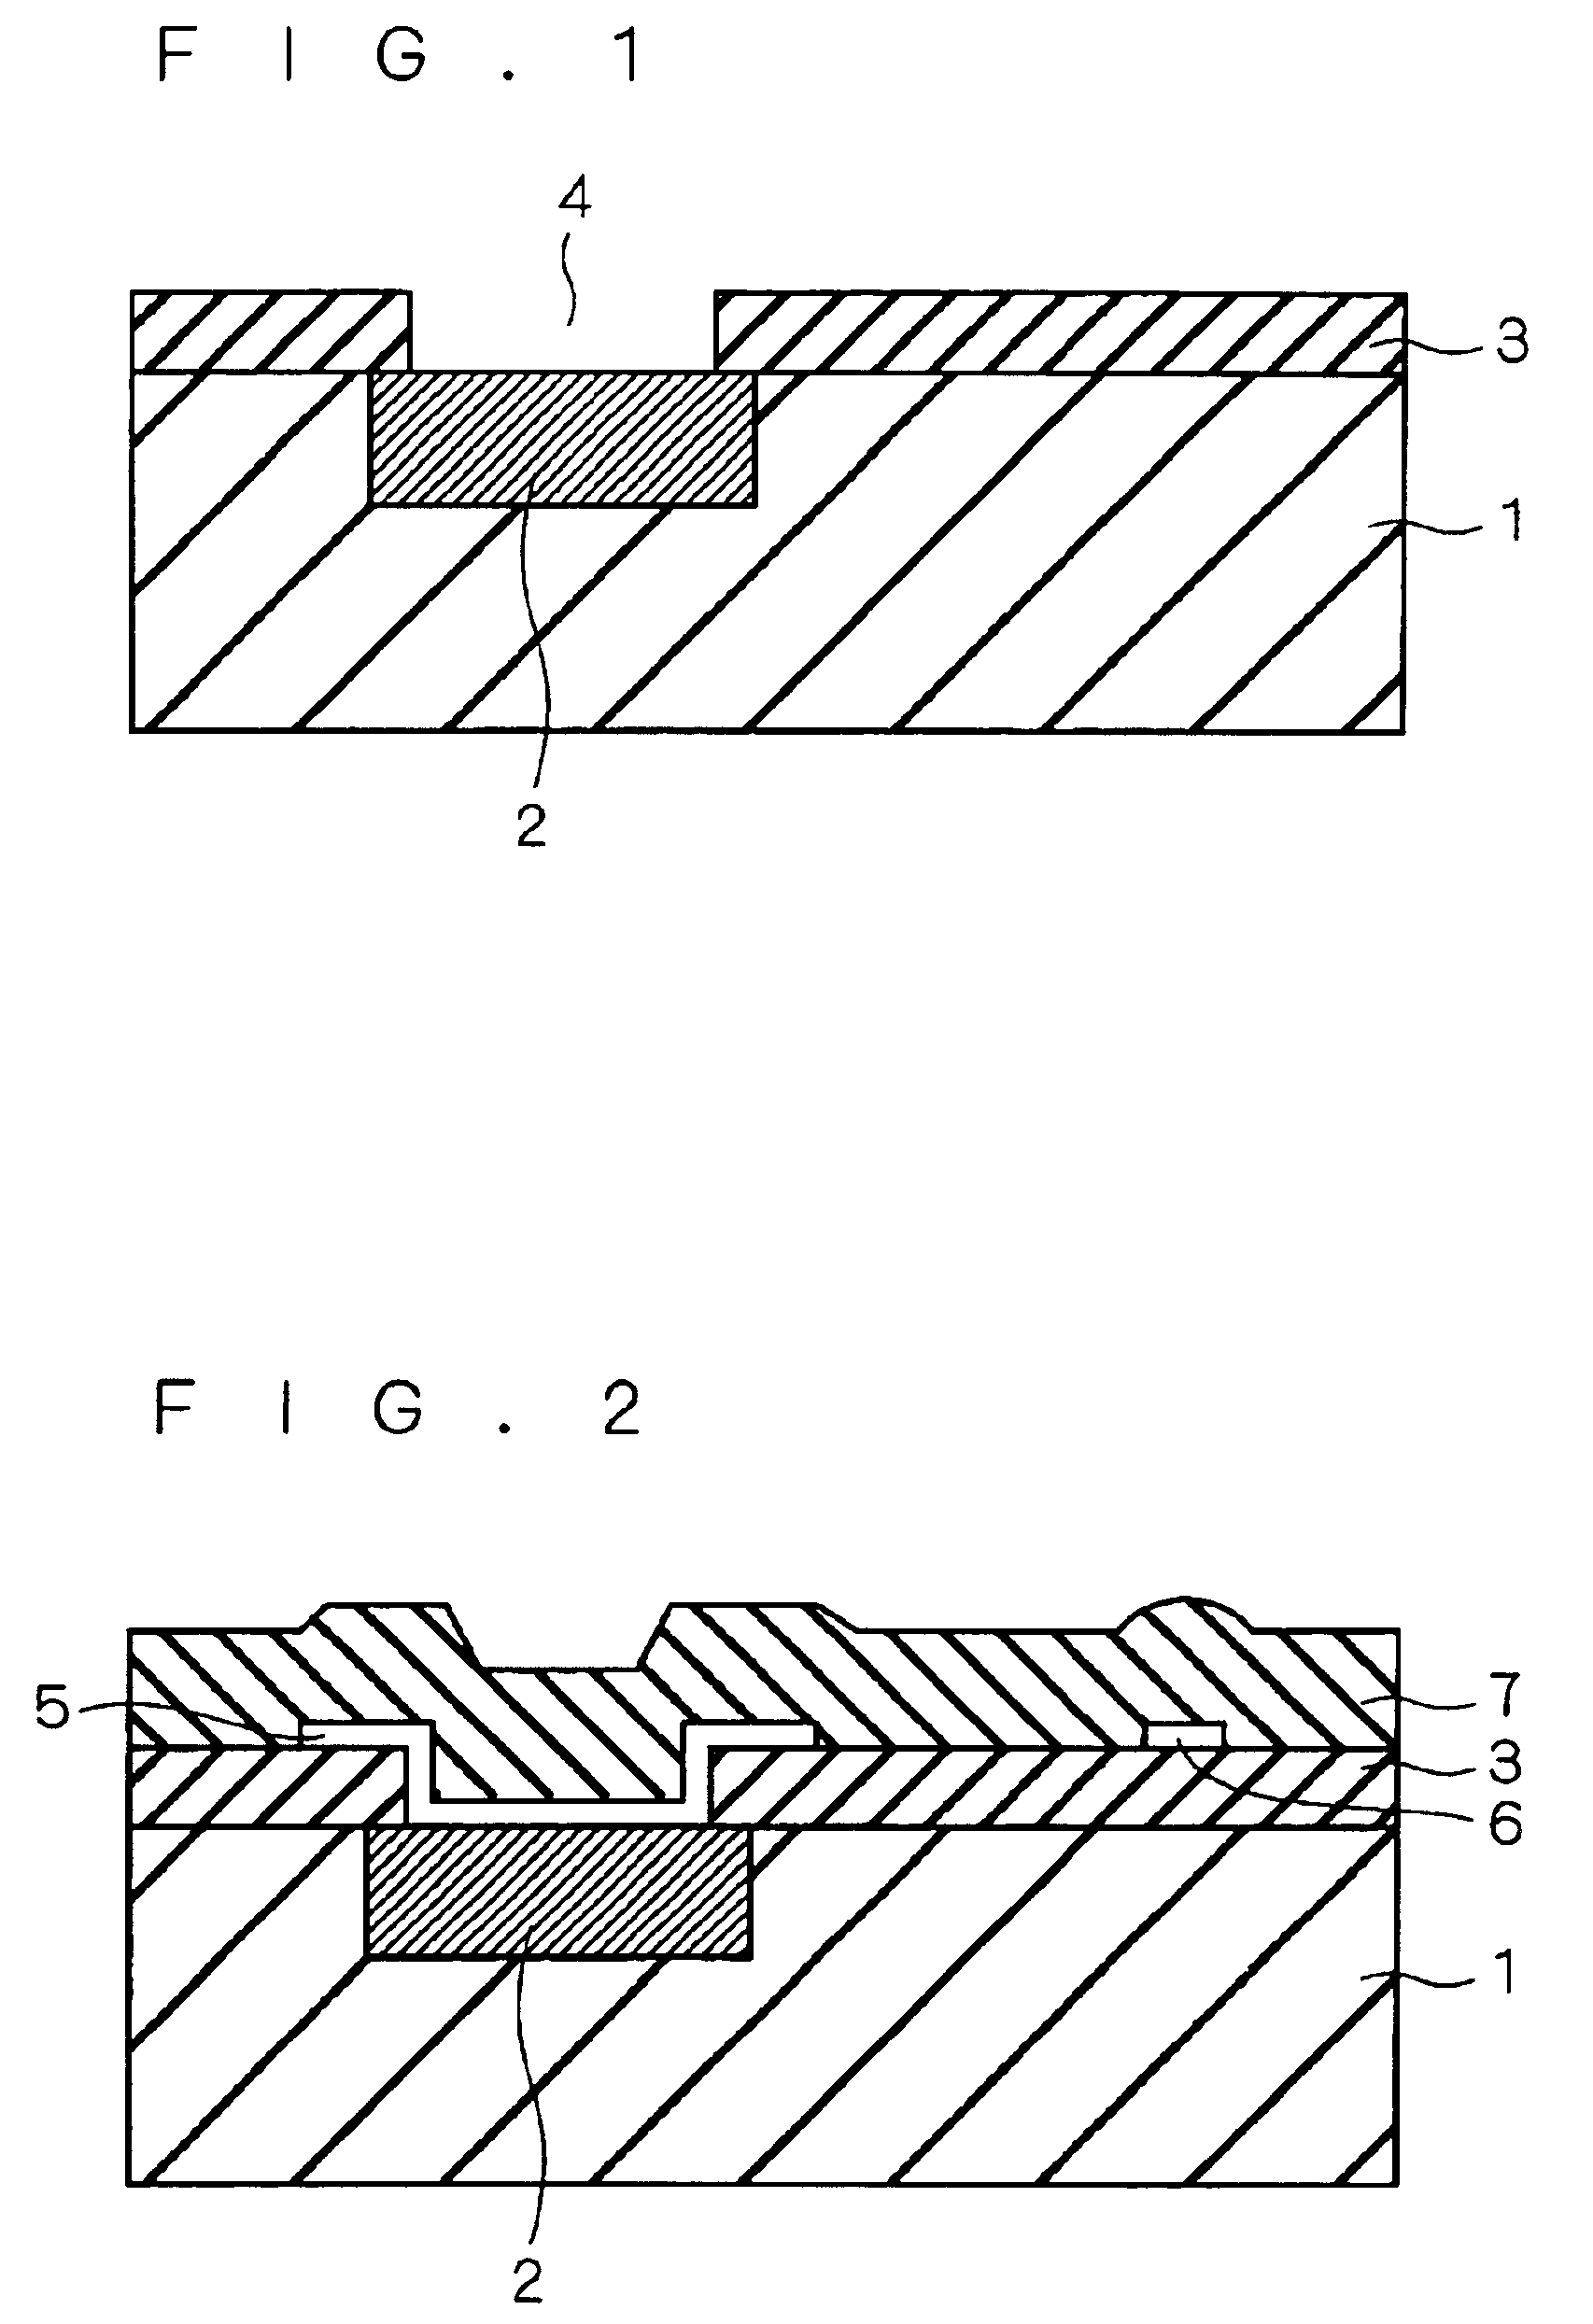 Flip chip mounting method of forming a solder bump on a chip pad that is exposed through an opening formed in a polyimide film that includes utilizing underfill to bond the chip to a substrate